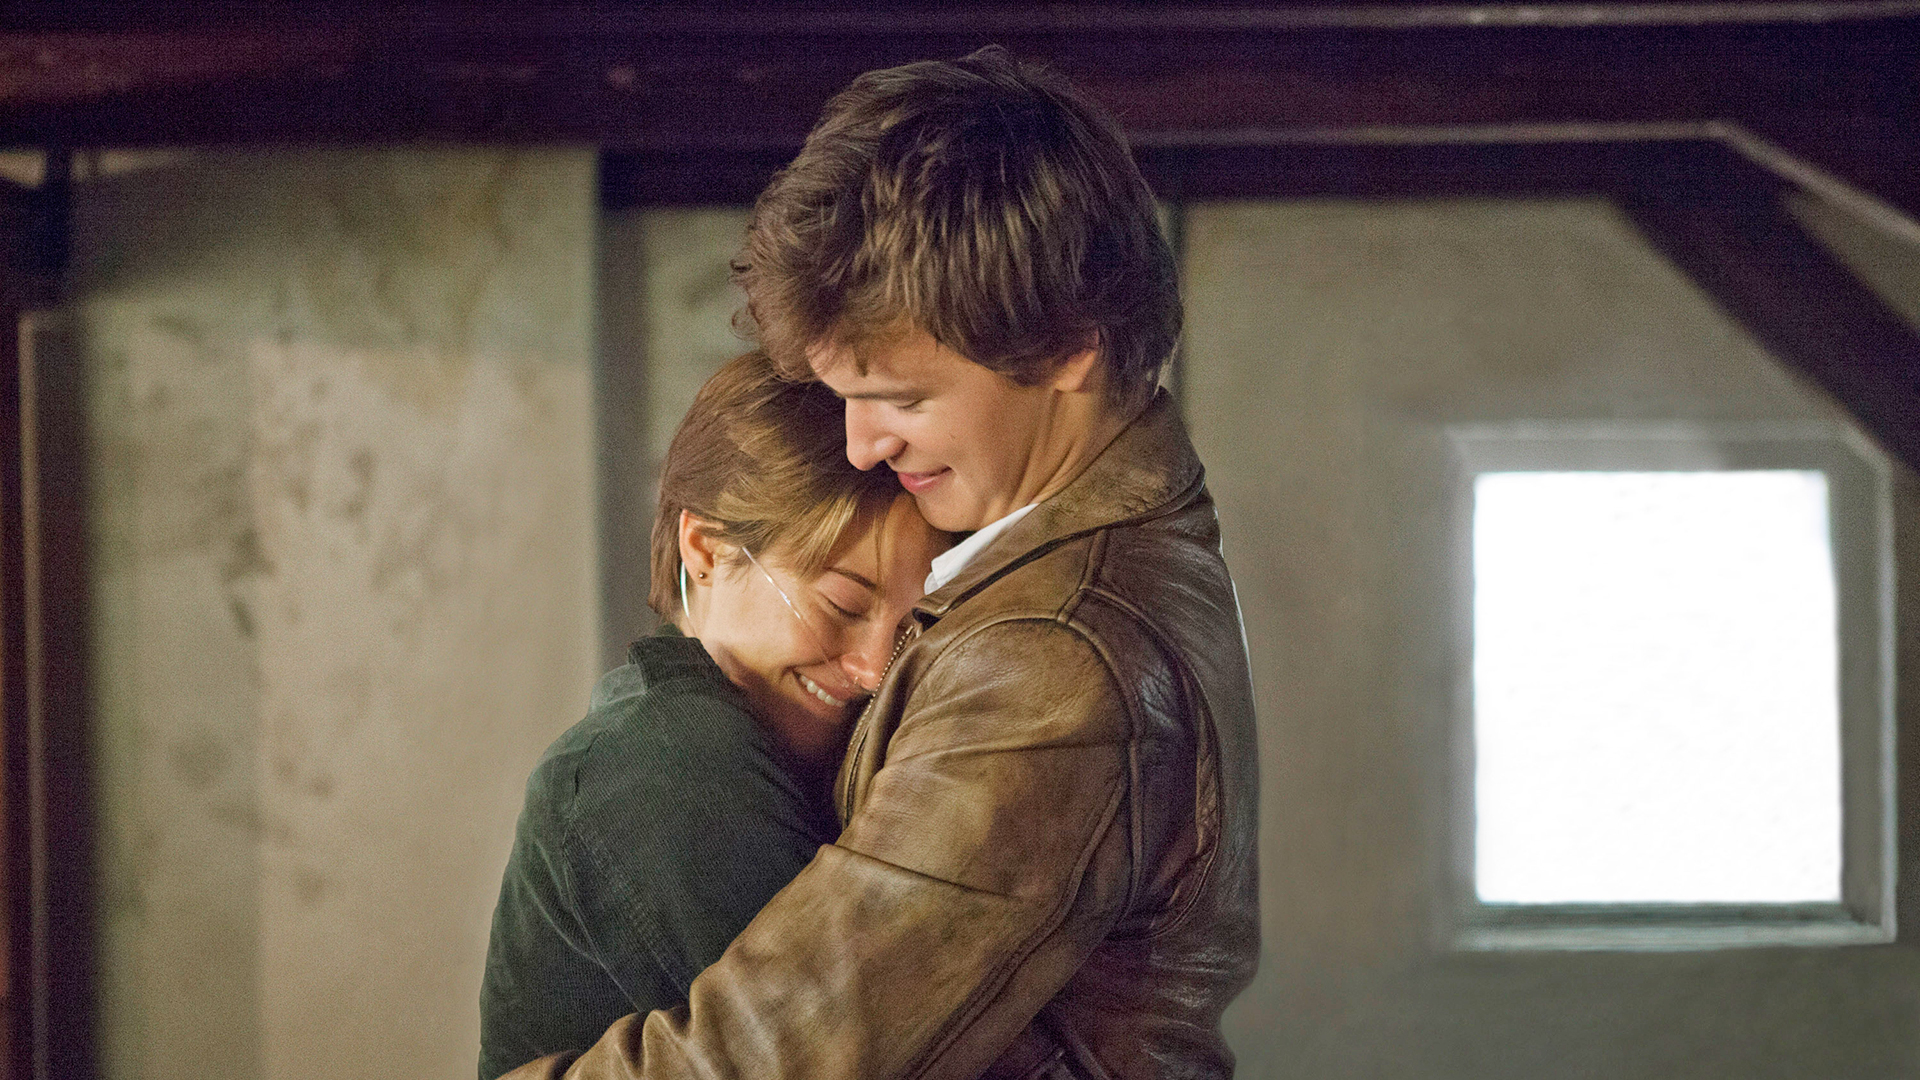 In The Film, Hazel And Gus Journey To Amsterdam And - صور فيلم The Fault In Our Stars , HD Wallpaper & Backgrounds